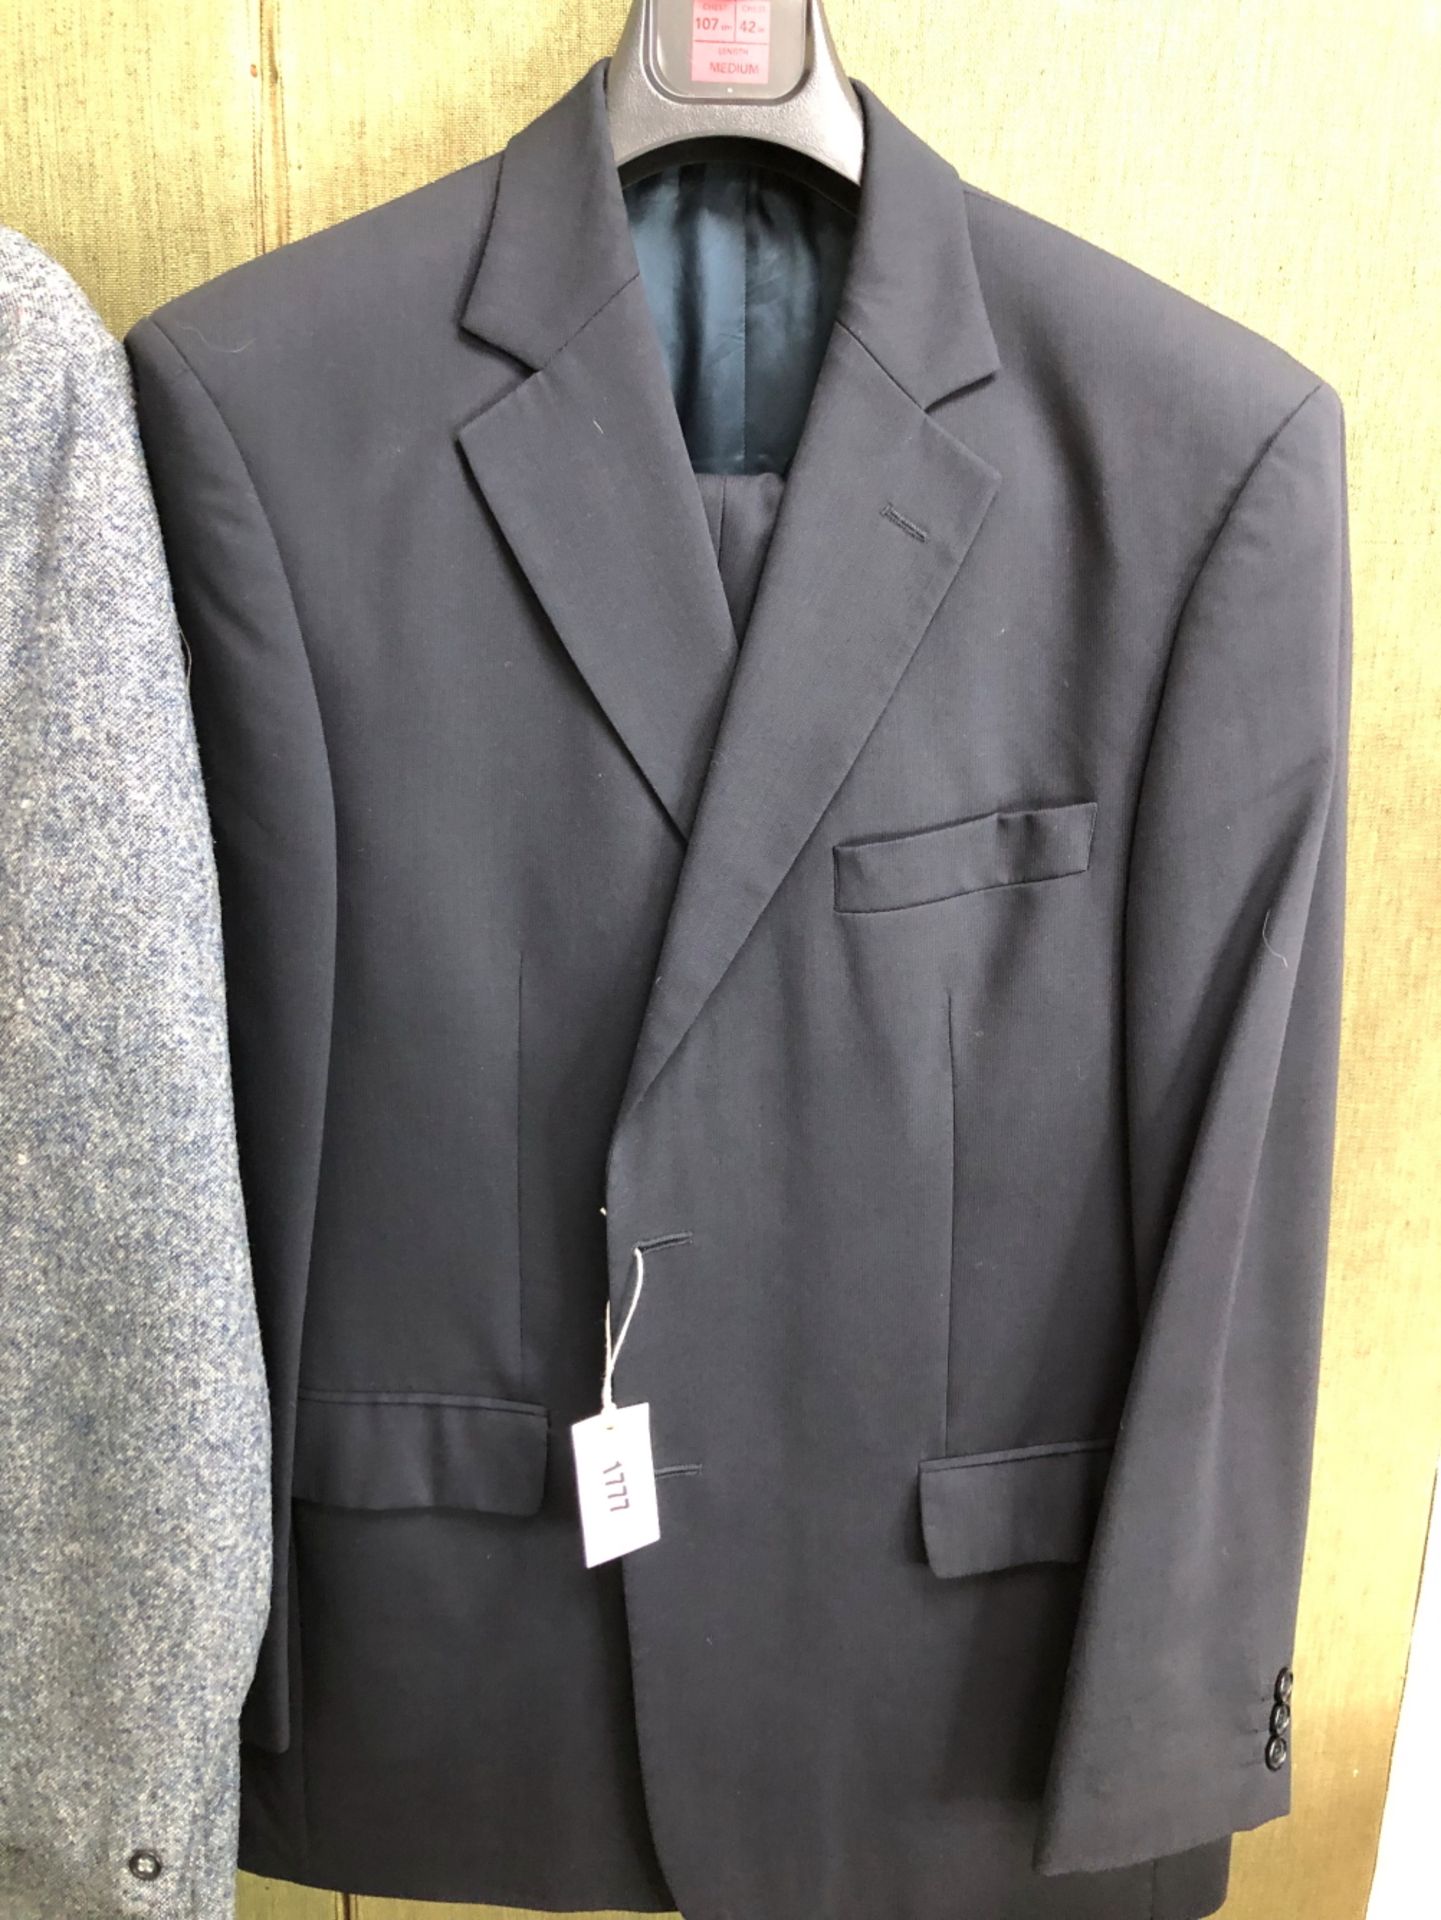 GENTS SUIT: MARKS AND SPENCER, BLACK, CHEST 42, WAIST 36, INSIDE LEG 29, TOGETHER WITH GENTS JACKET: - Image 2 of 7